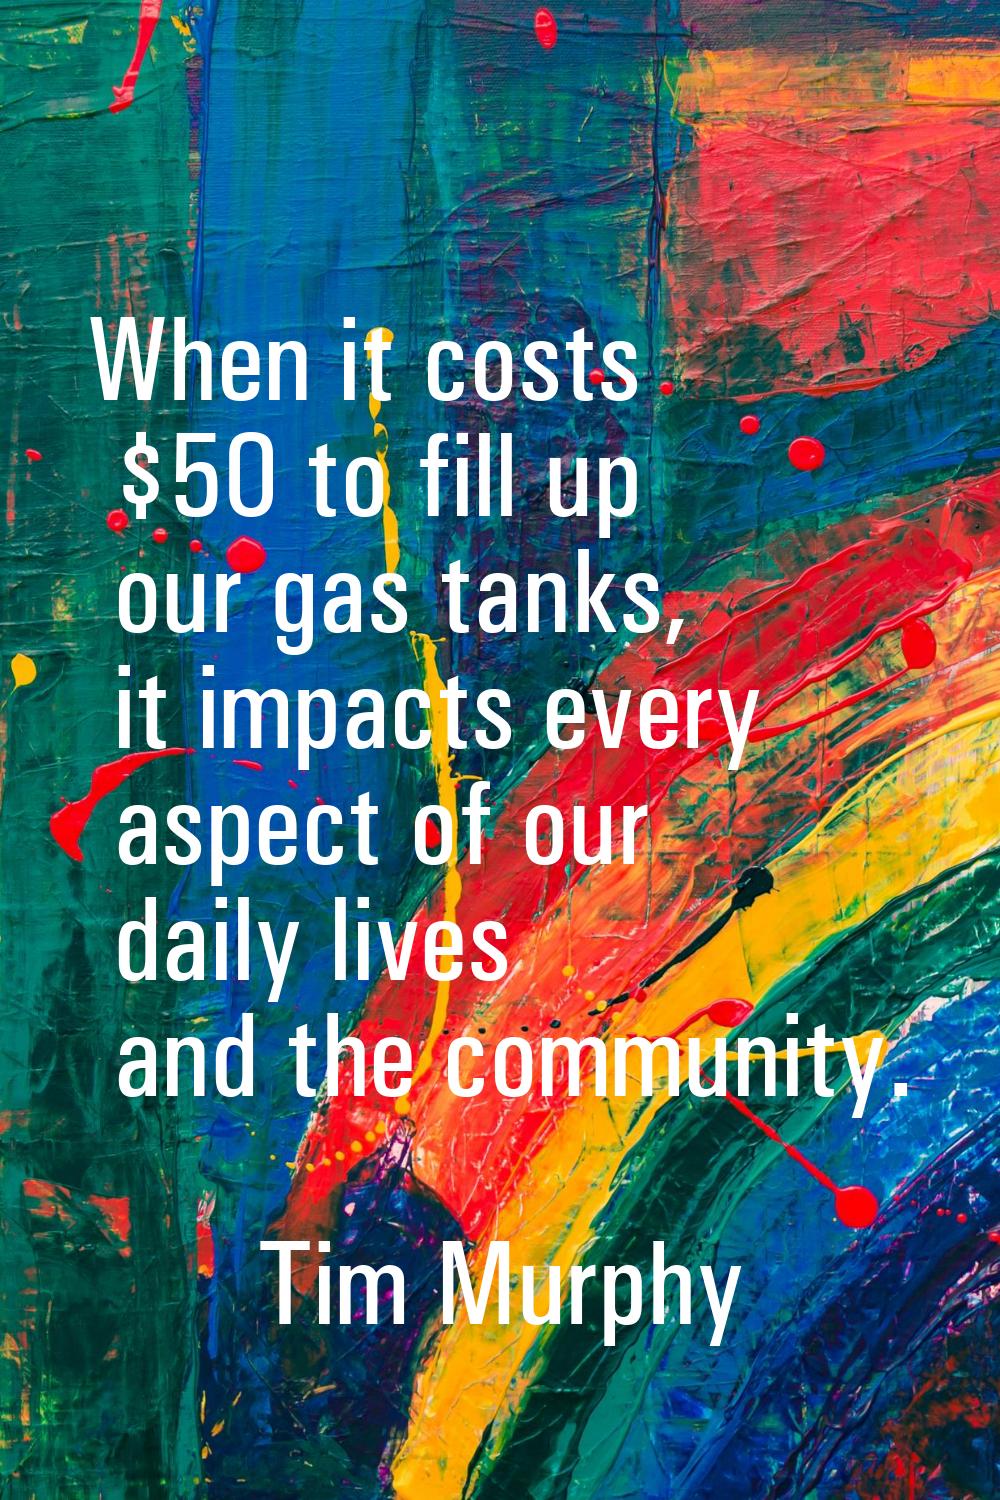 When it costs $50 to fill up our gas tanks, it impacts every aspect of our daily lives and the comm